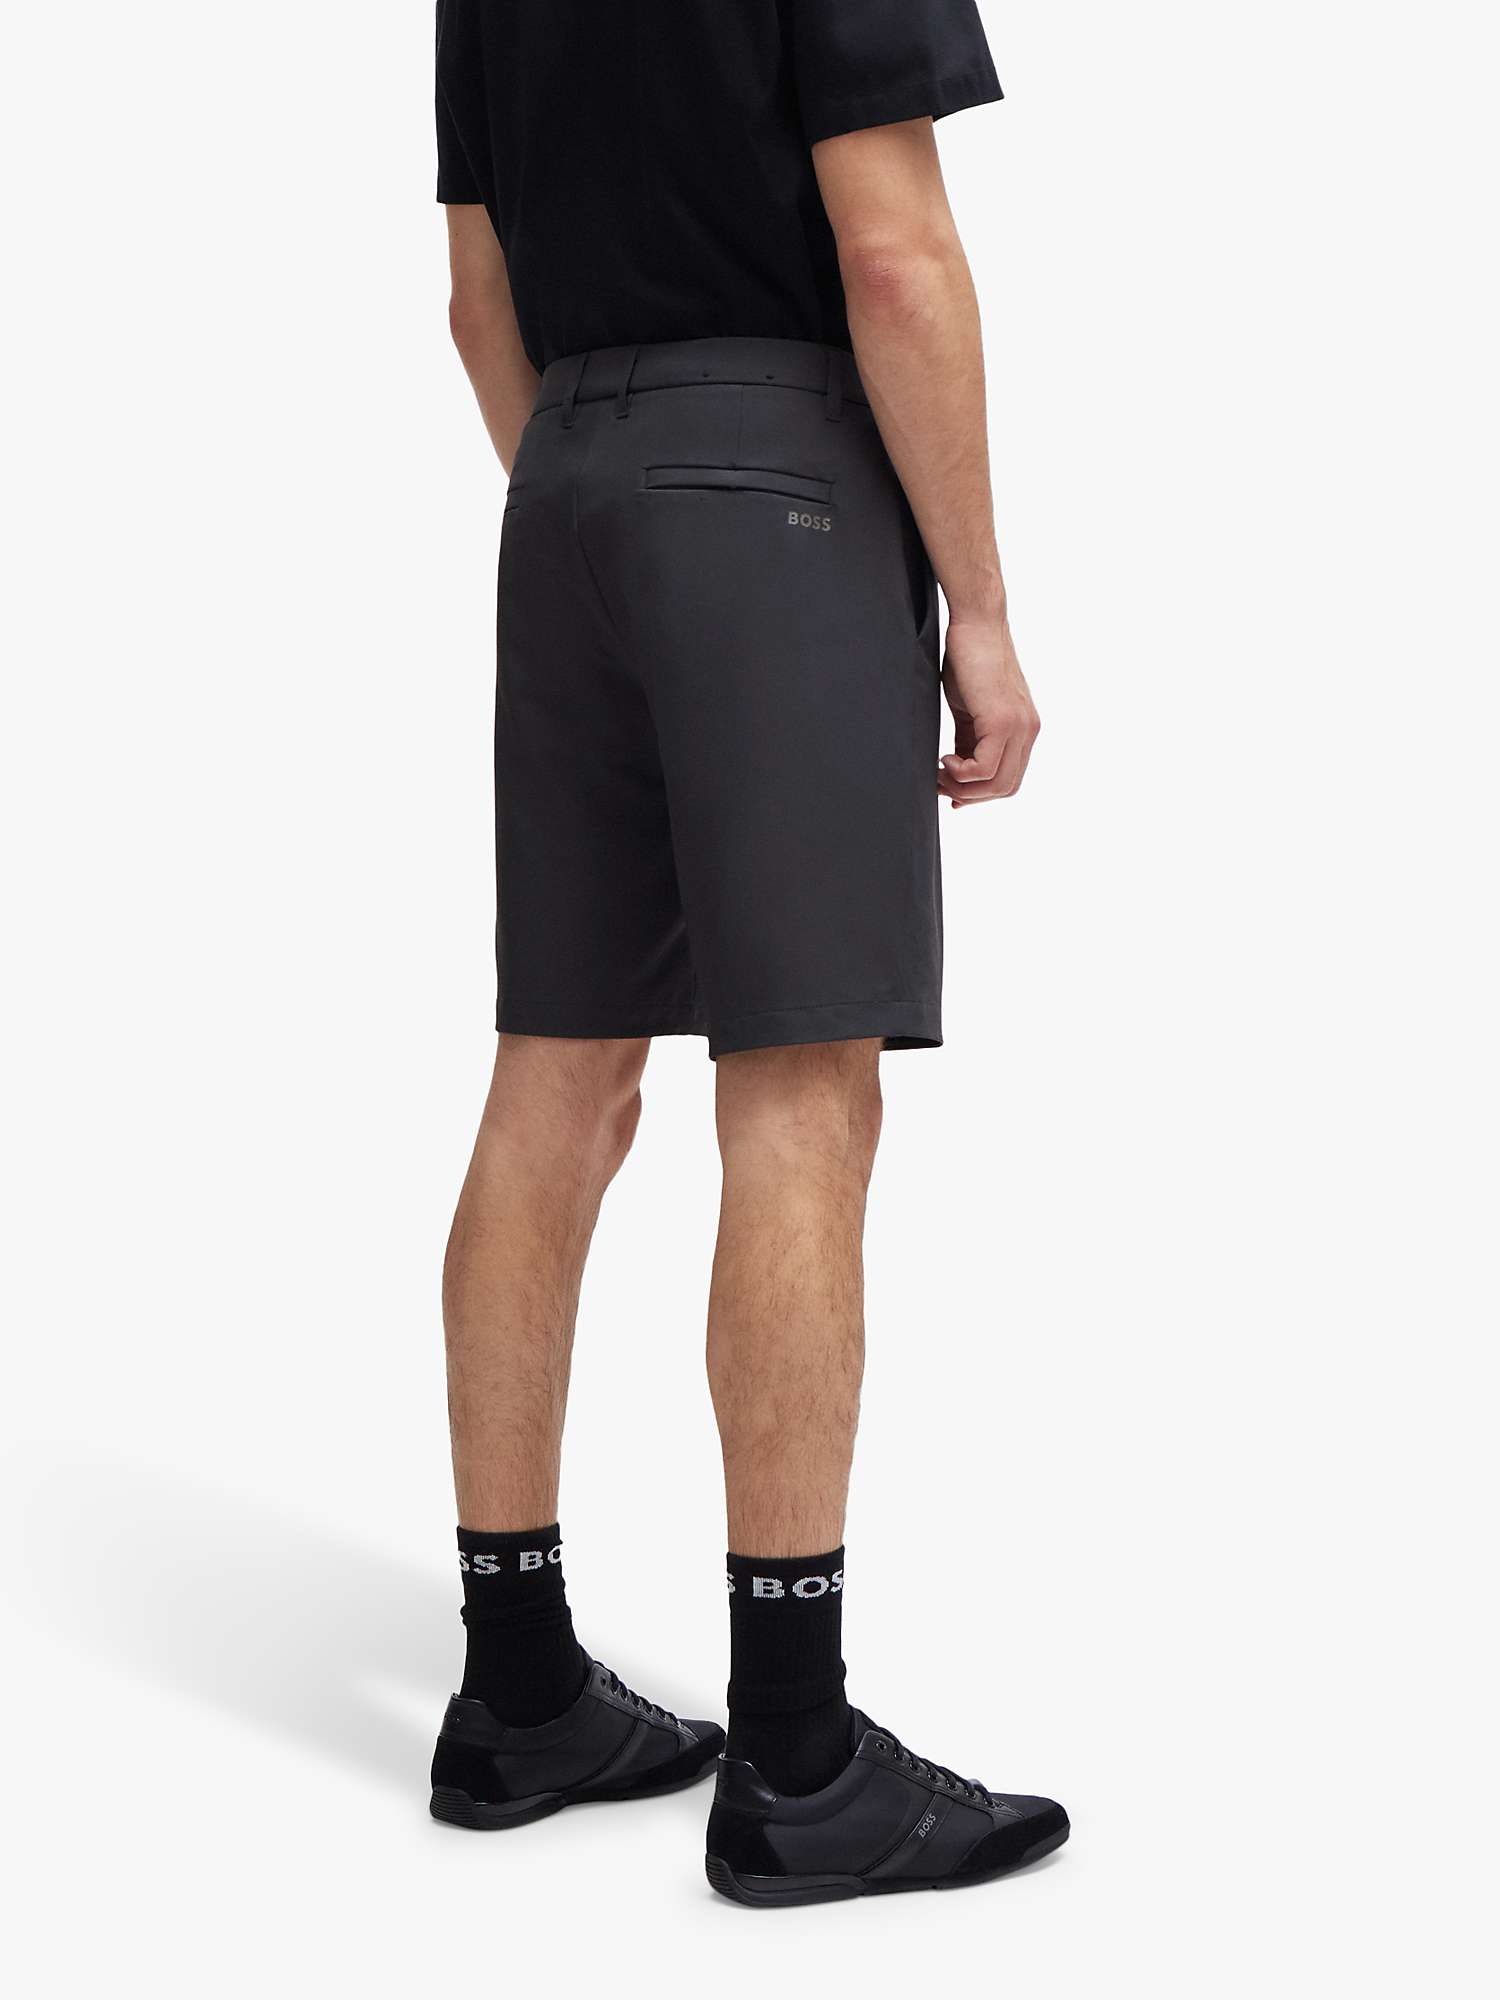 Buy BOSS Commuter Shorts, Charcoal Online at johnlewis.com